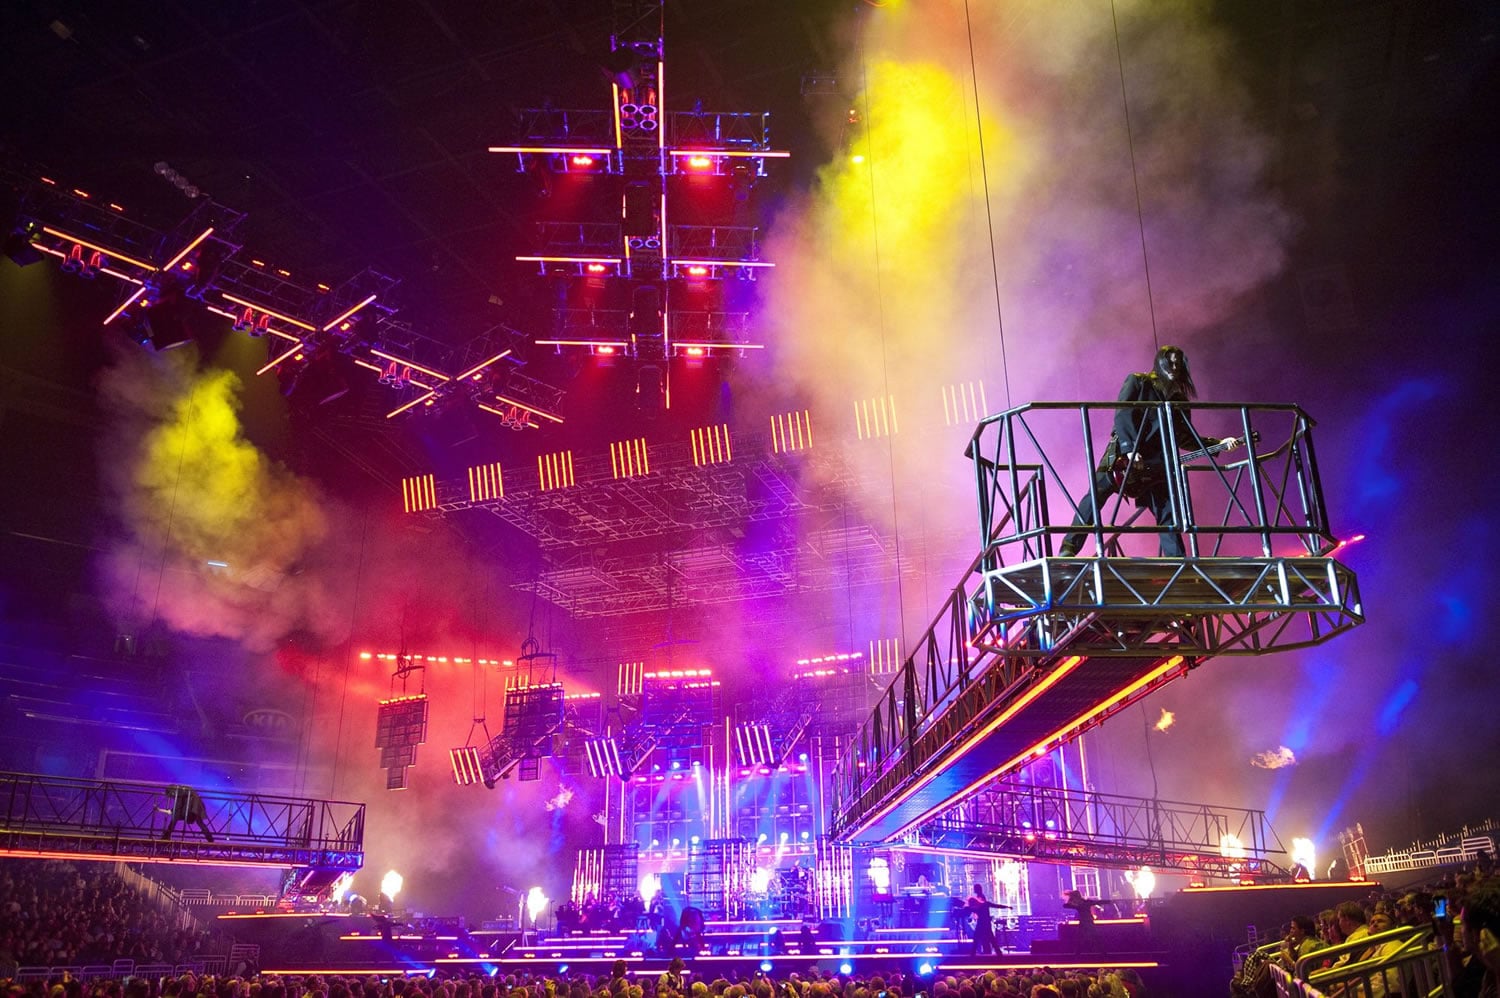 Trans-Siberian Orchestra incorporates classical music with hard rock and heavy metal elements.